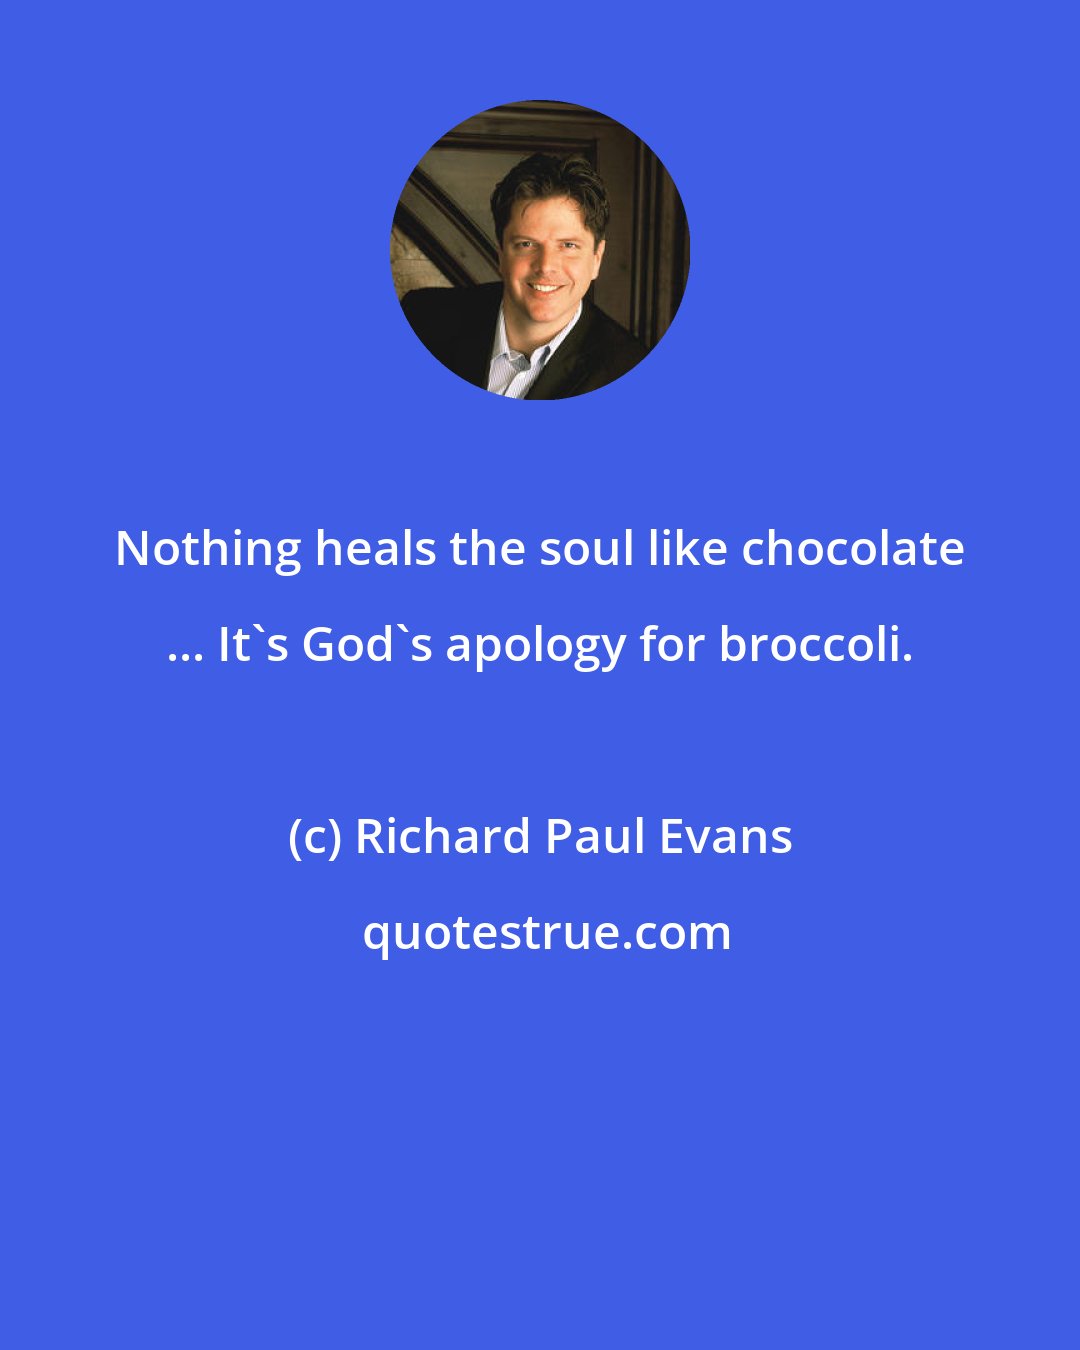 Richard Paul Evans: Nothing heals the soul like chocolate ... It's God's apology for broccoli.